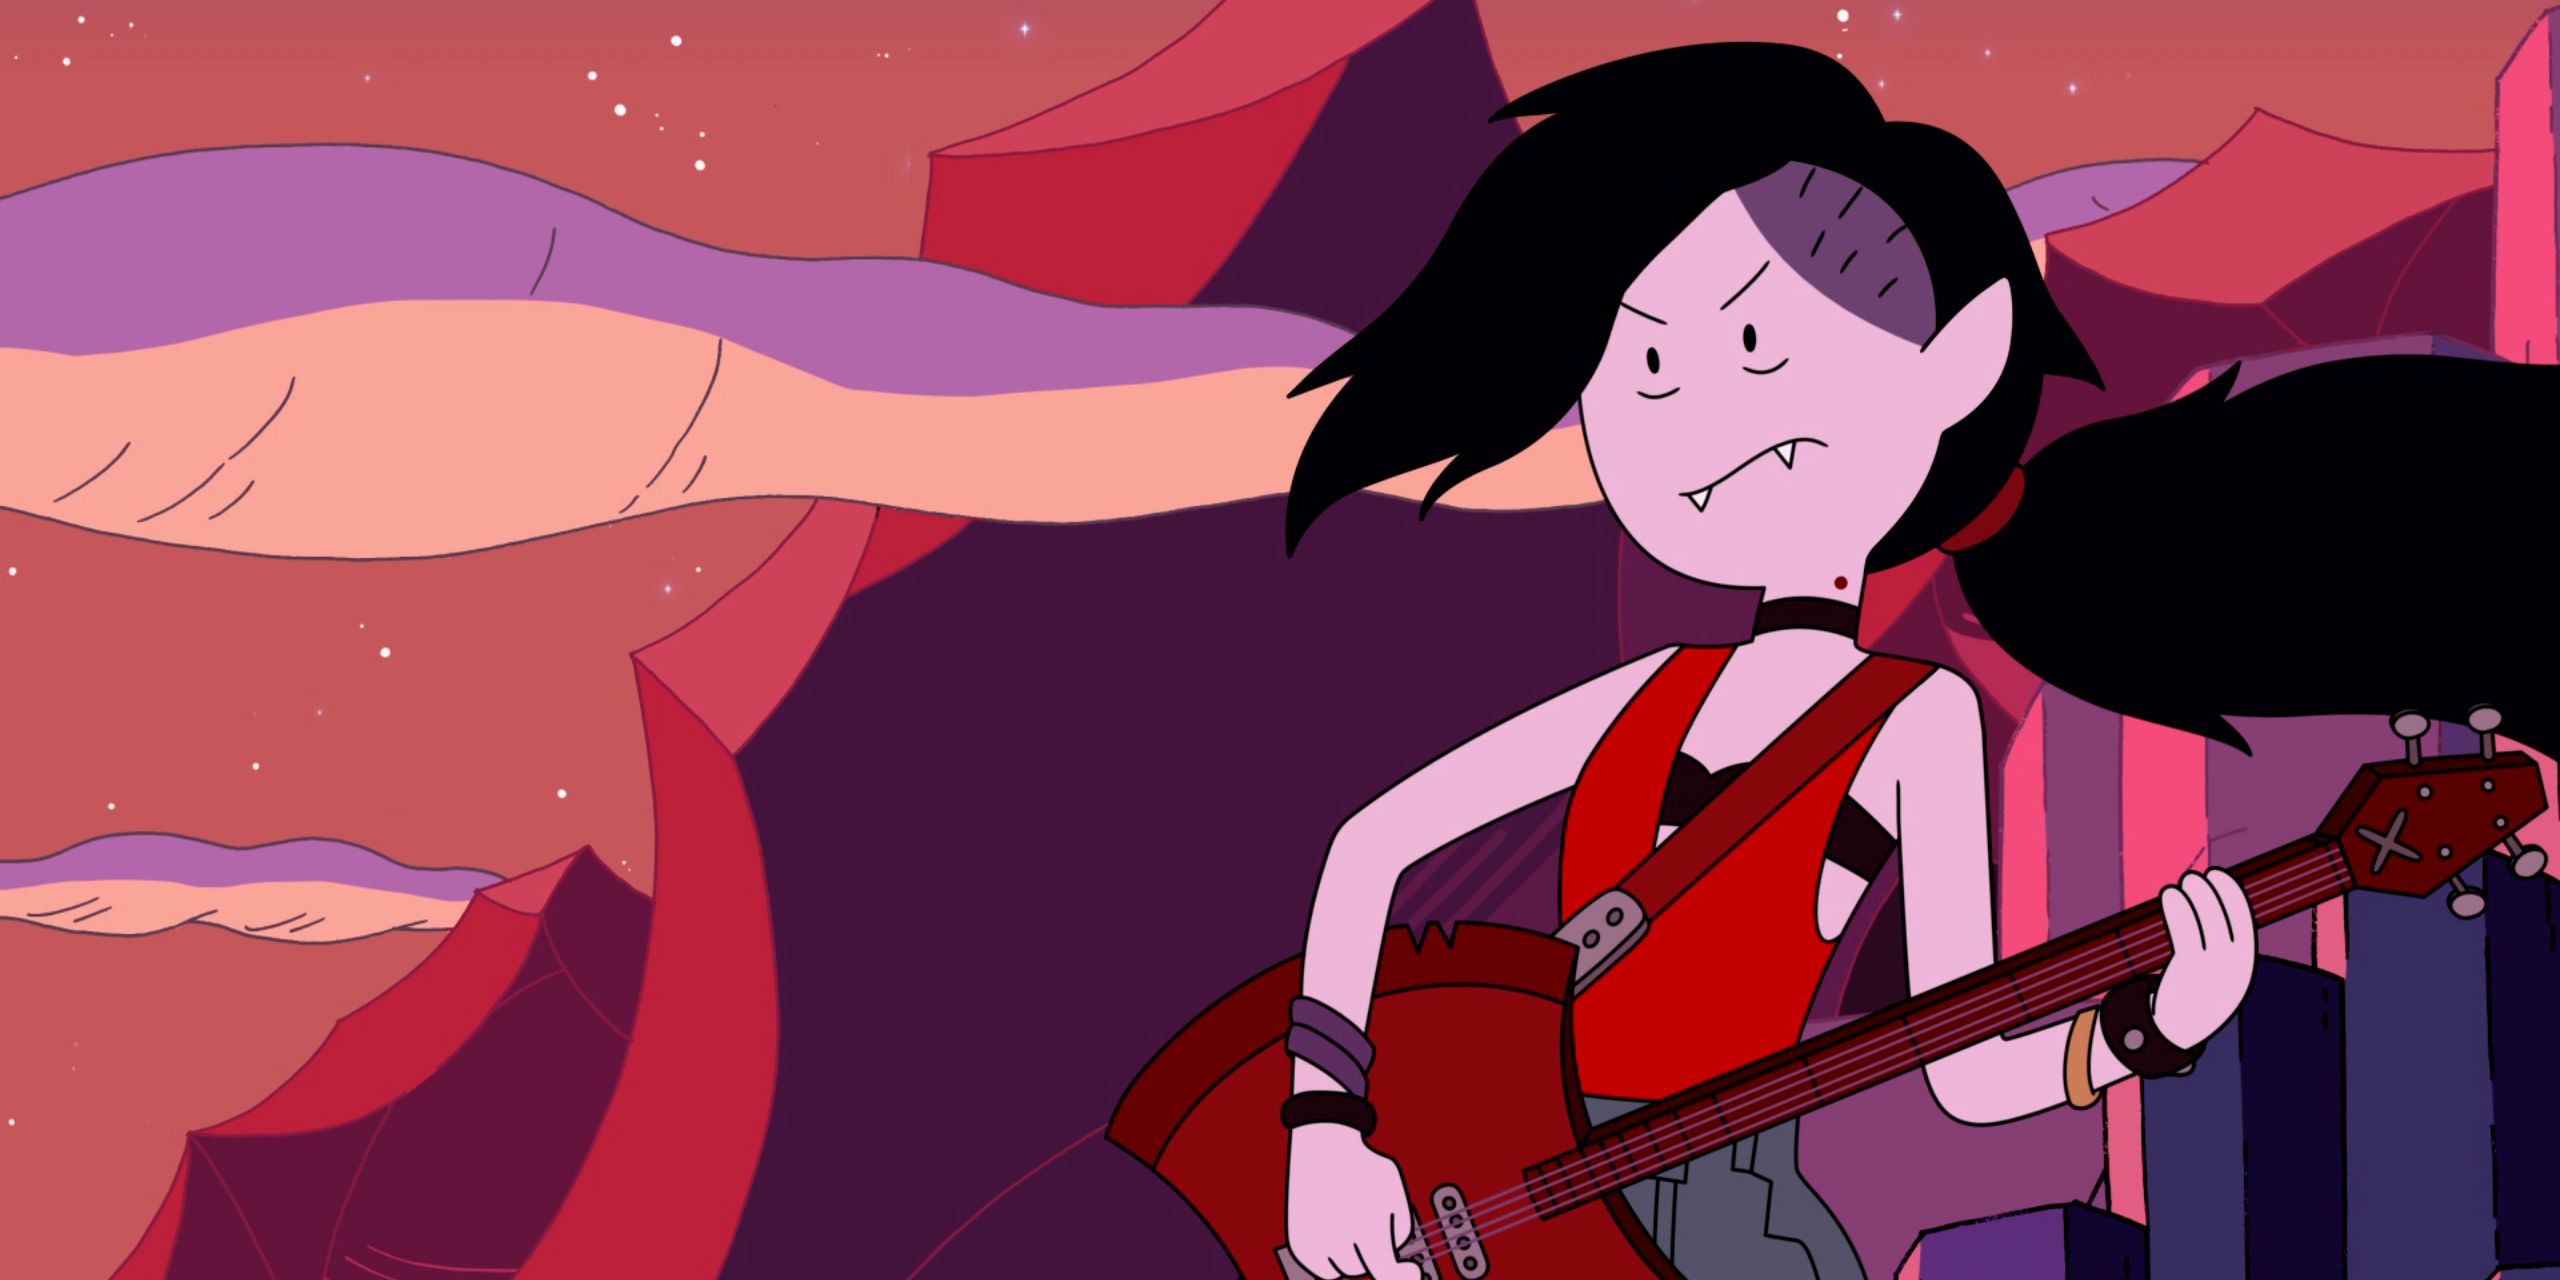 A younger Marceline in a flashback, wearing a red crop top and with a sideshave haircut.